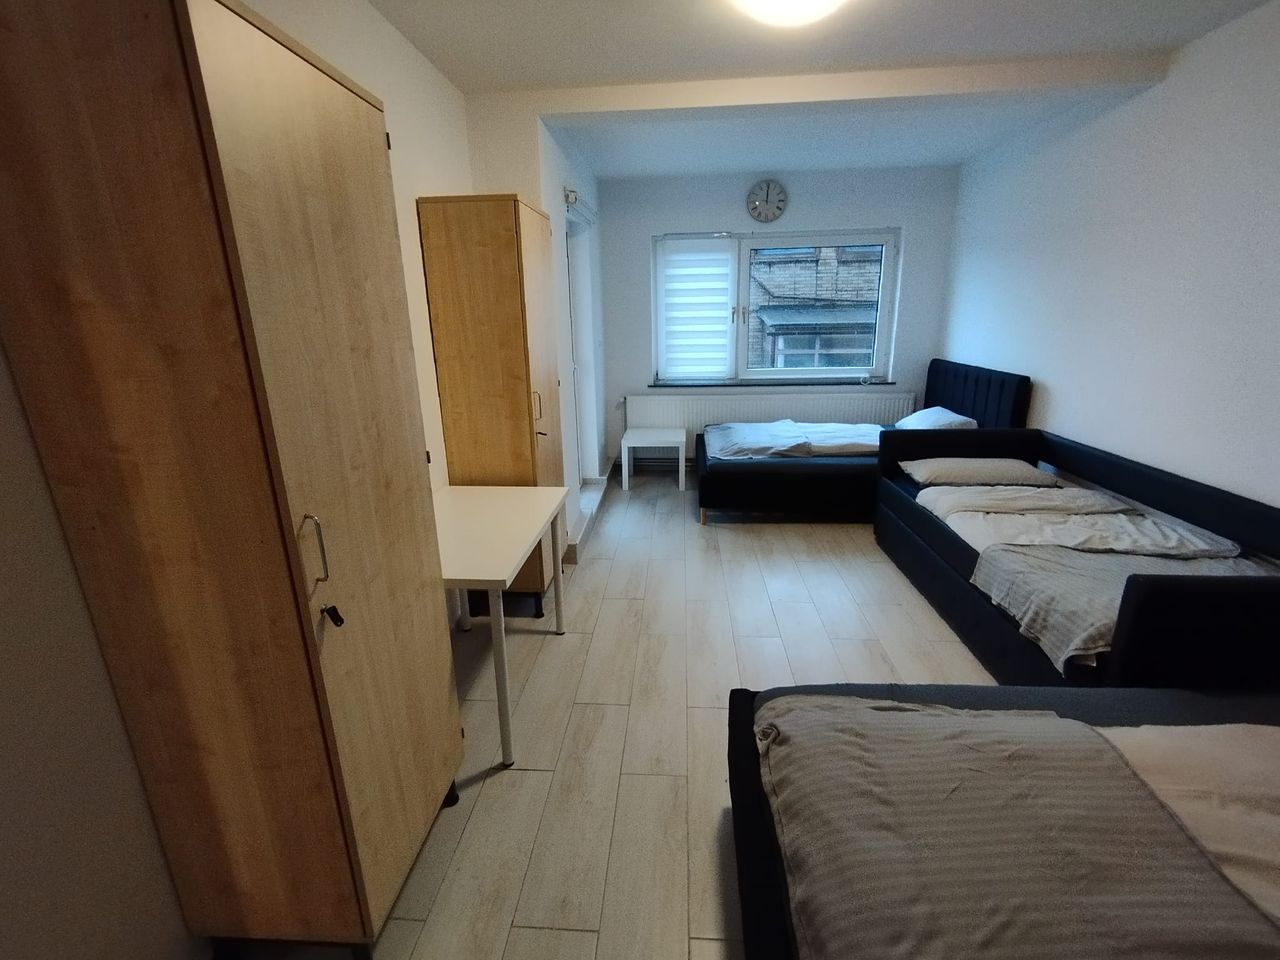 MK Hostel Oyten, shared room 4 people, fitter room, holiday room, NEW OPENING